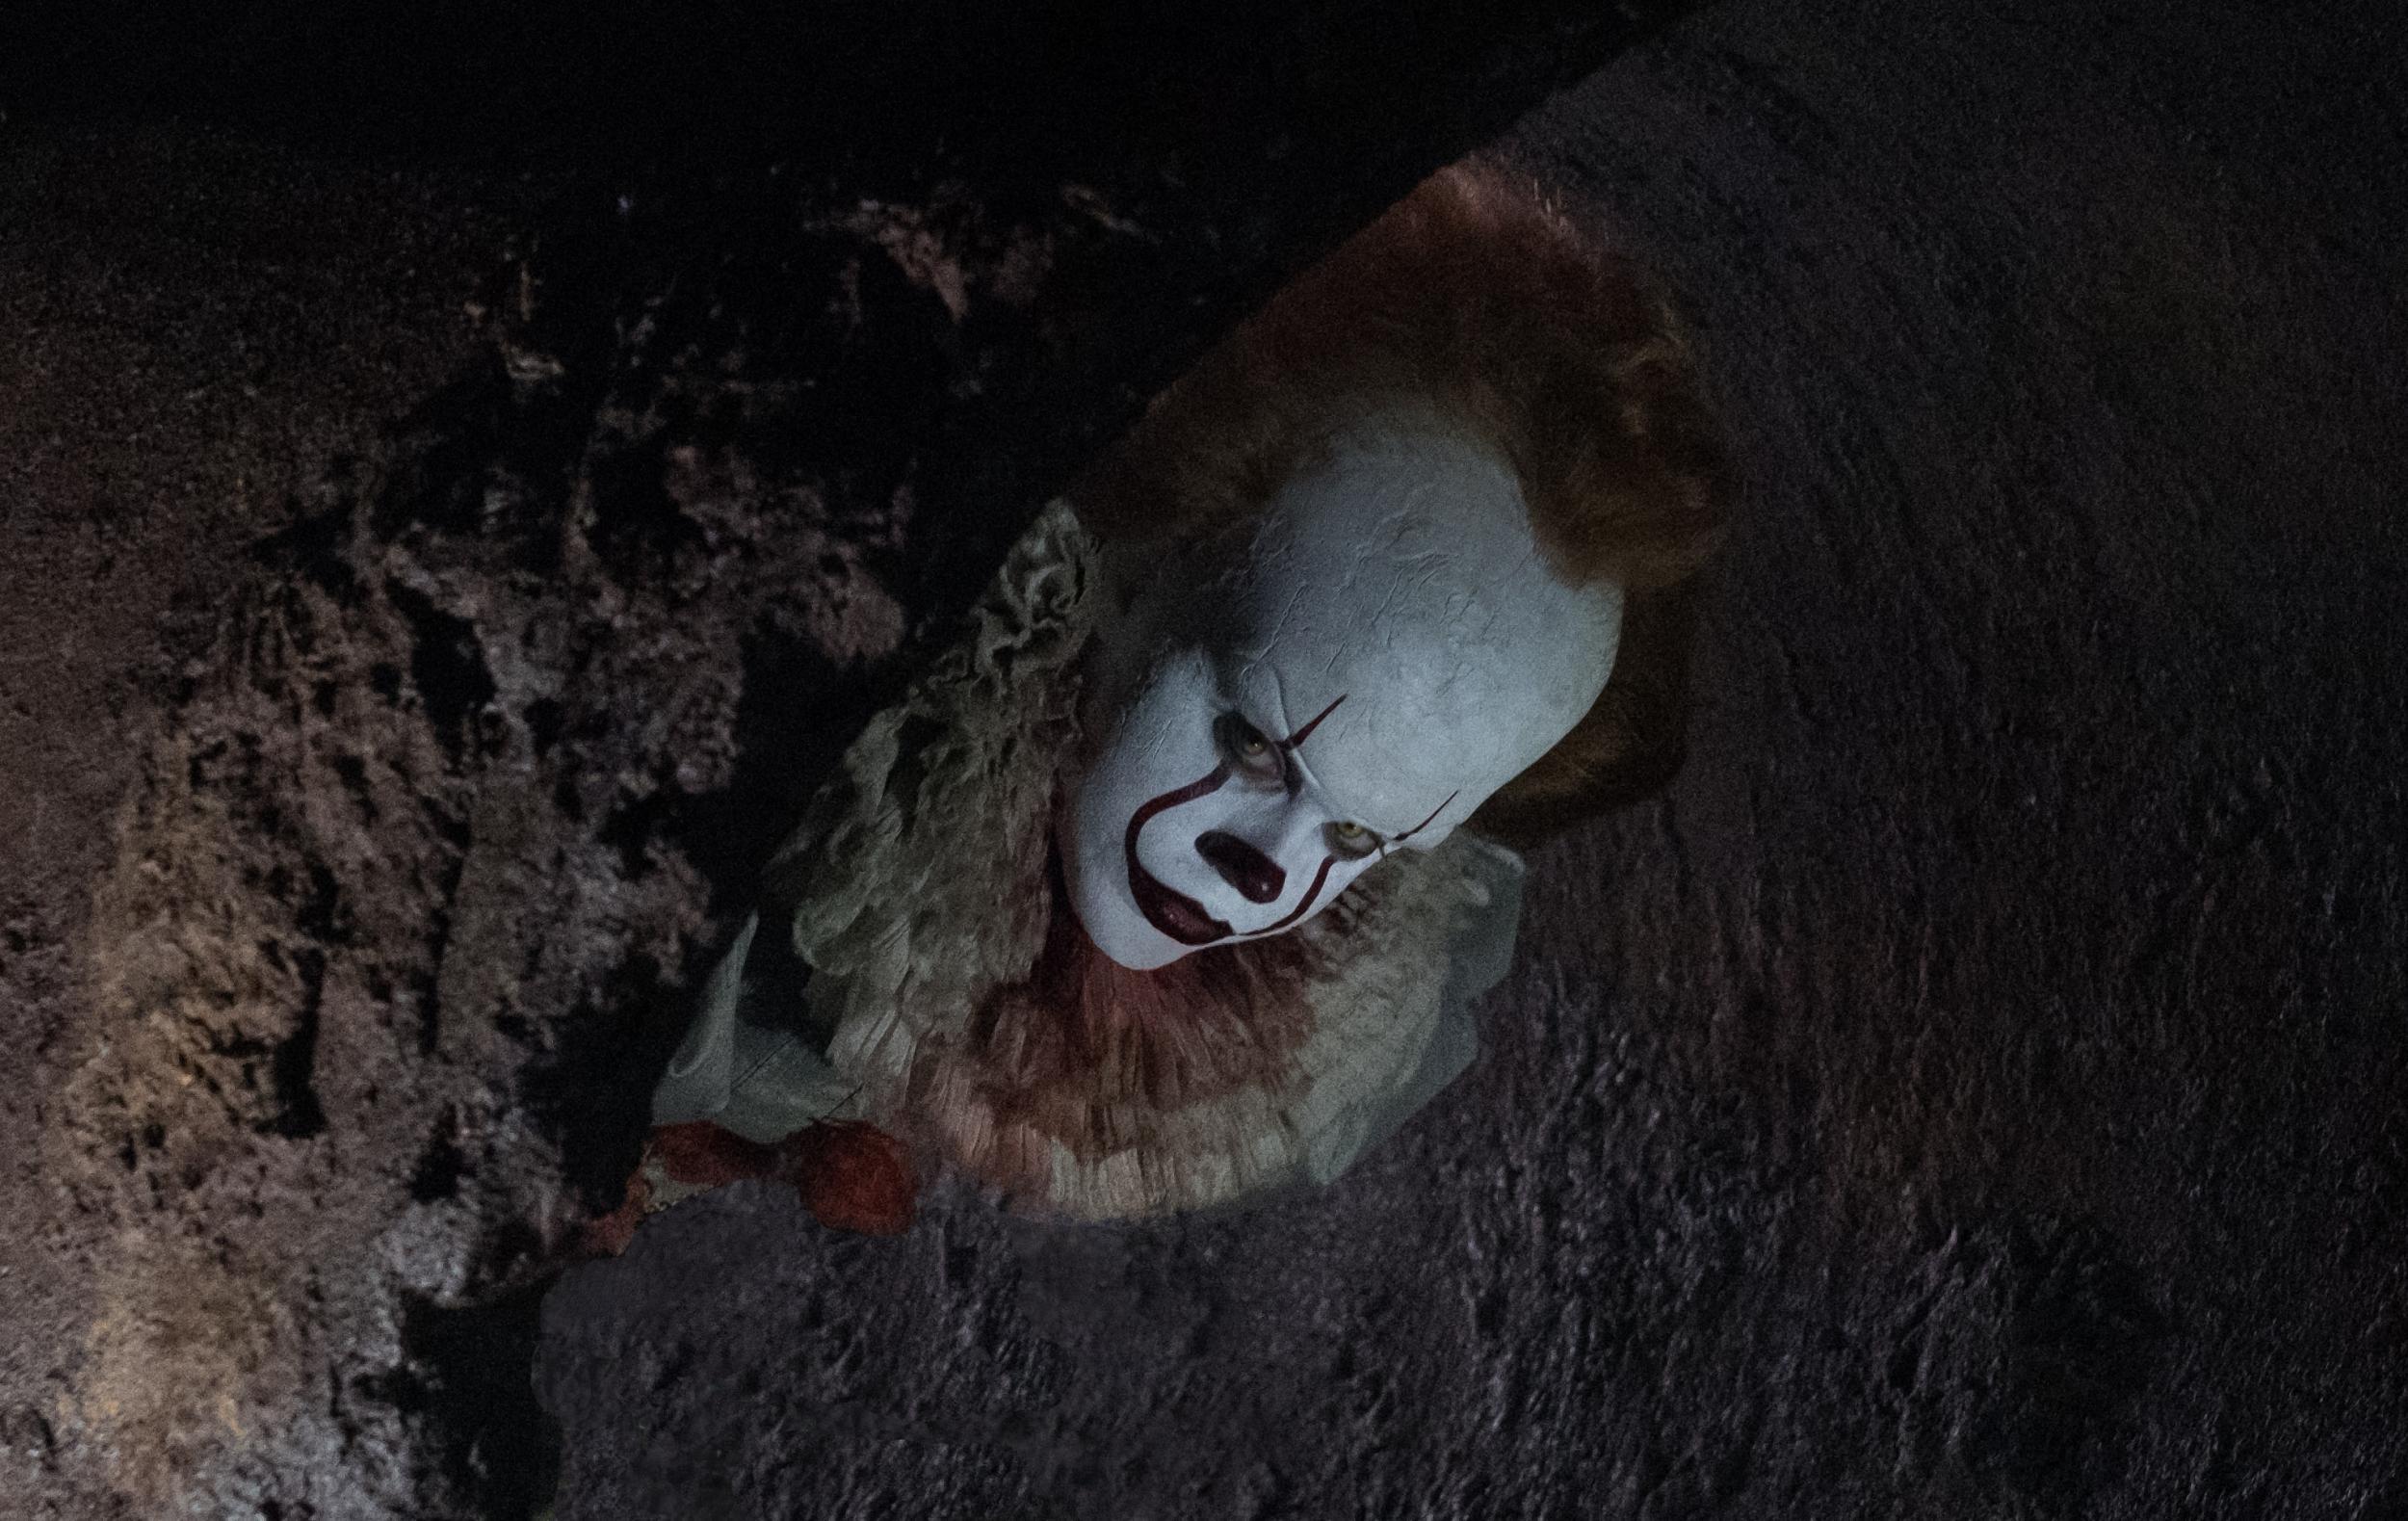 Warner Bros. Pictures has teamed up with MTV to get a look at the legendary maniacal clown with a sneak peak at 'It', directed by Andrés Muschietti.